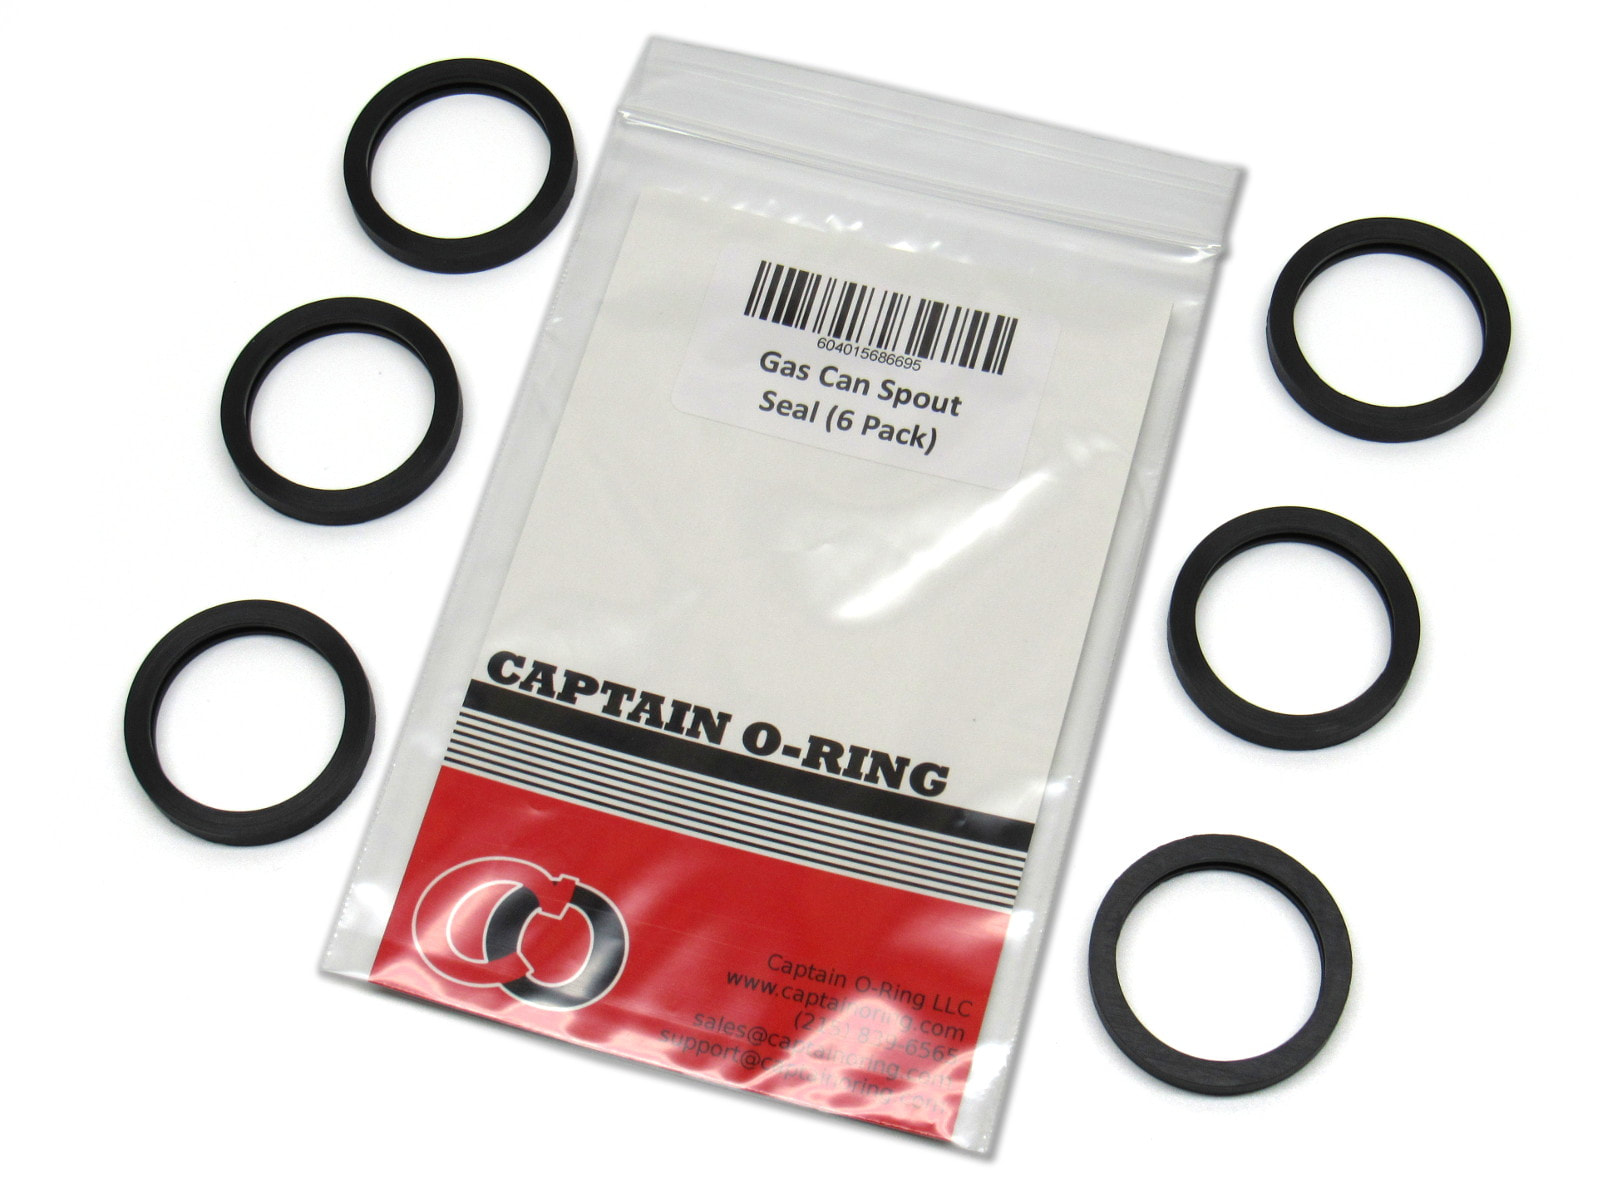 20-Pack SPOUT GASKETS Gas Can Gott Rubbermaid Briggs Wedco Scepter Eagle Midwest 